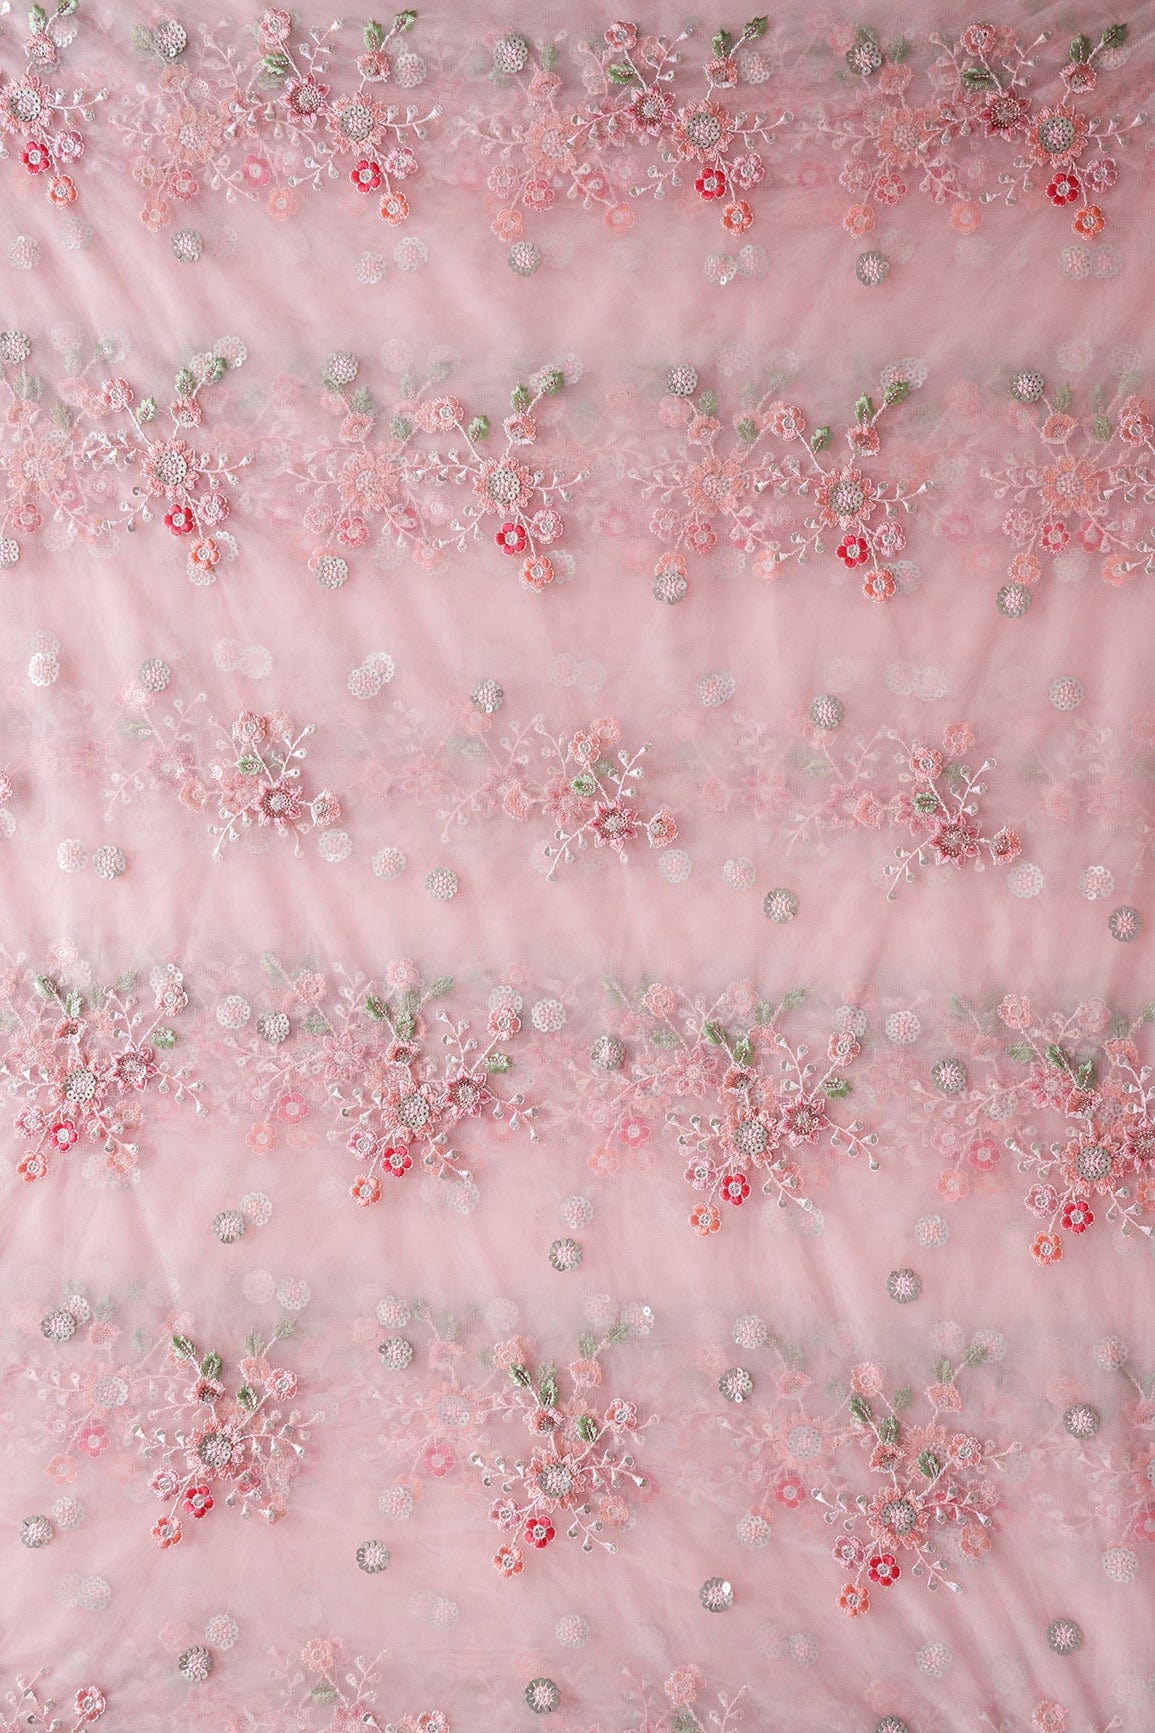 doeraa Embroidery Fabrics Multi Thread With Sequins Floral Butta Embroidery On Baby Pink Soft Net Fabric